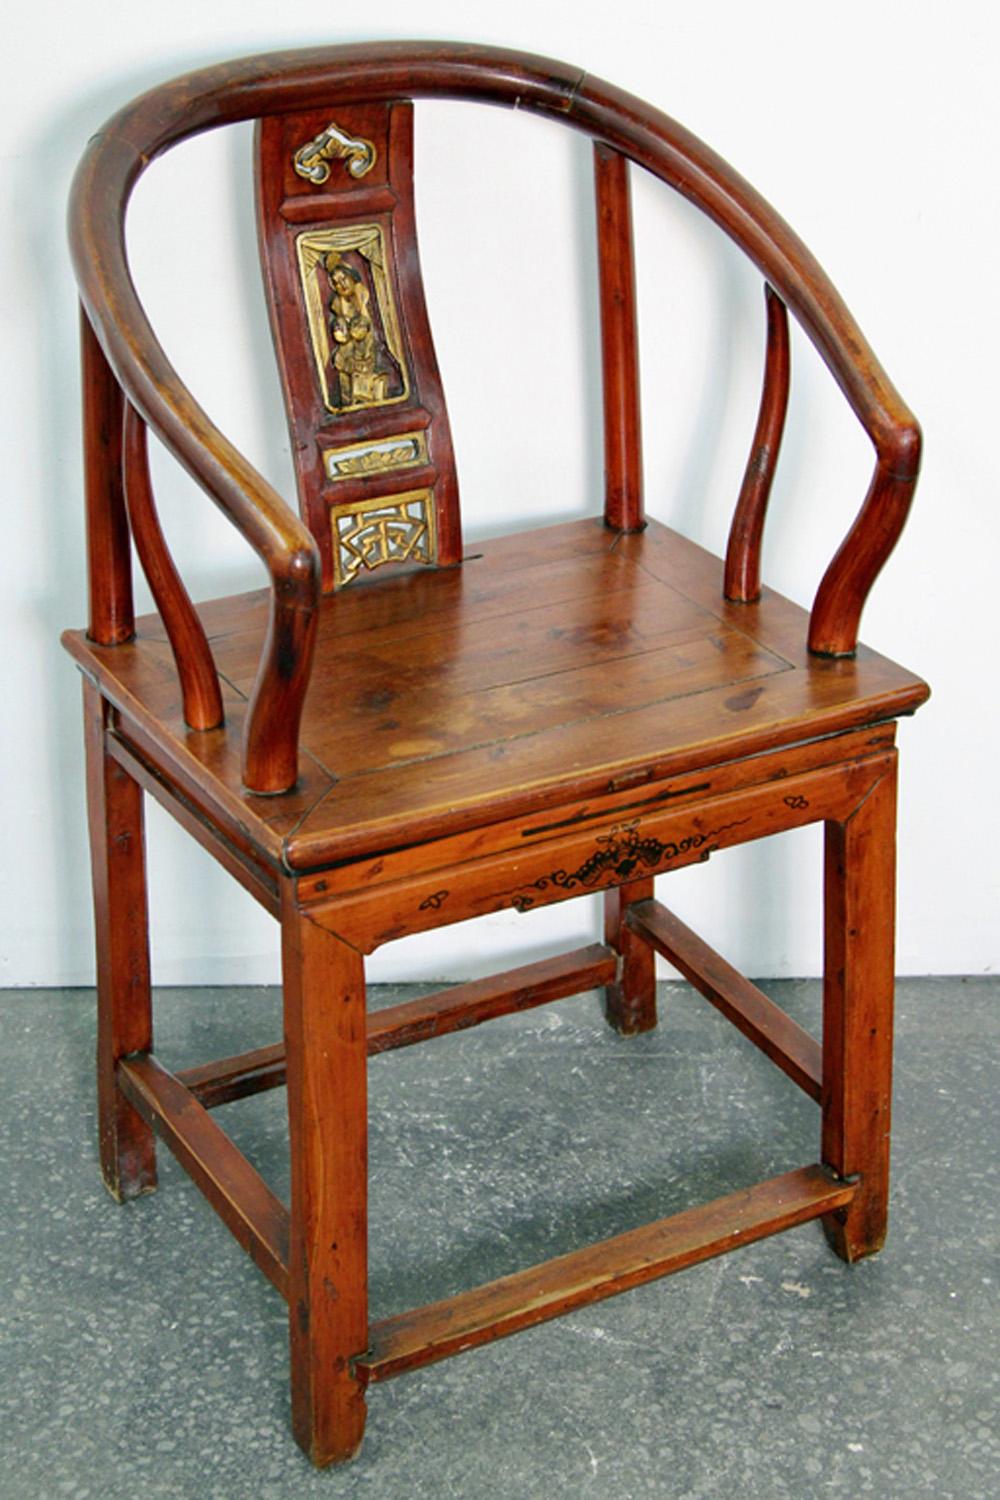 Antique Chinese armchair with gilt decoration, hand carved.